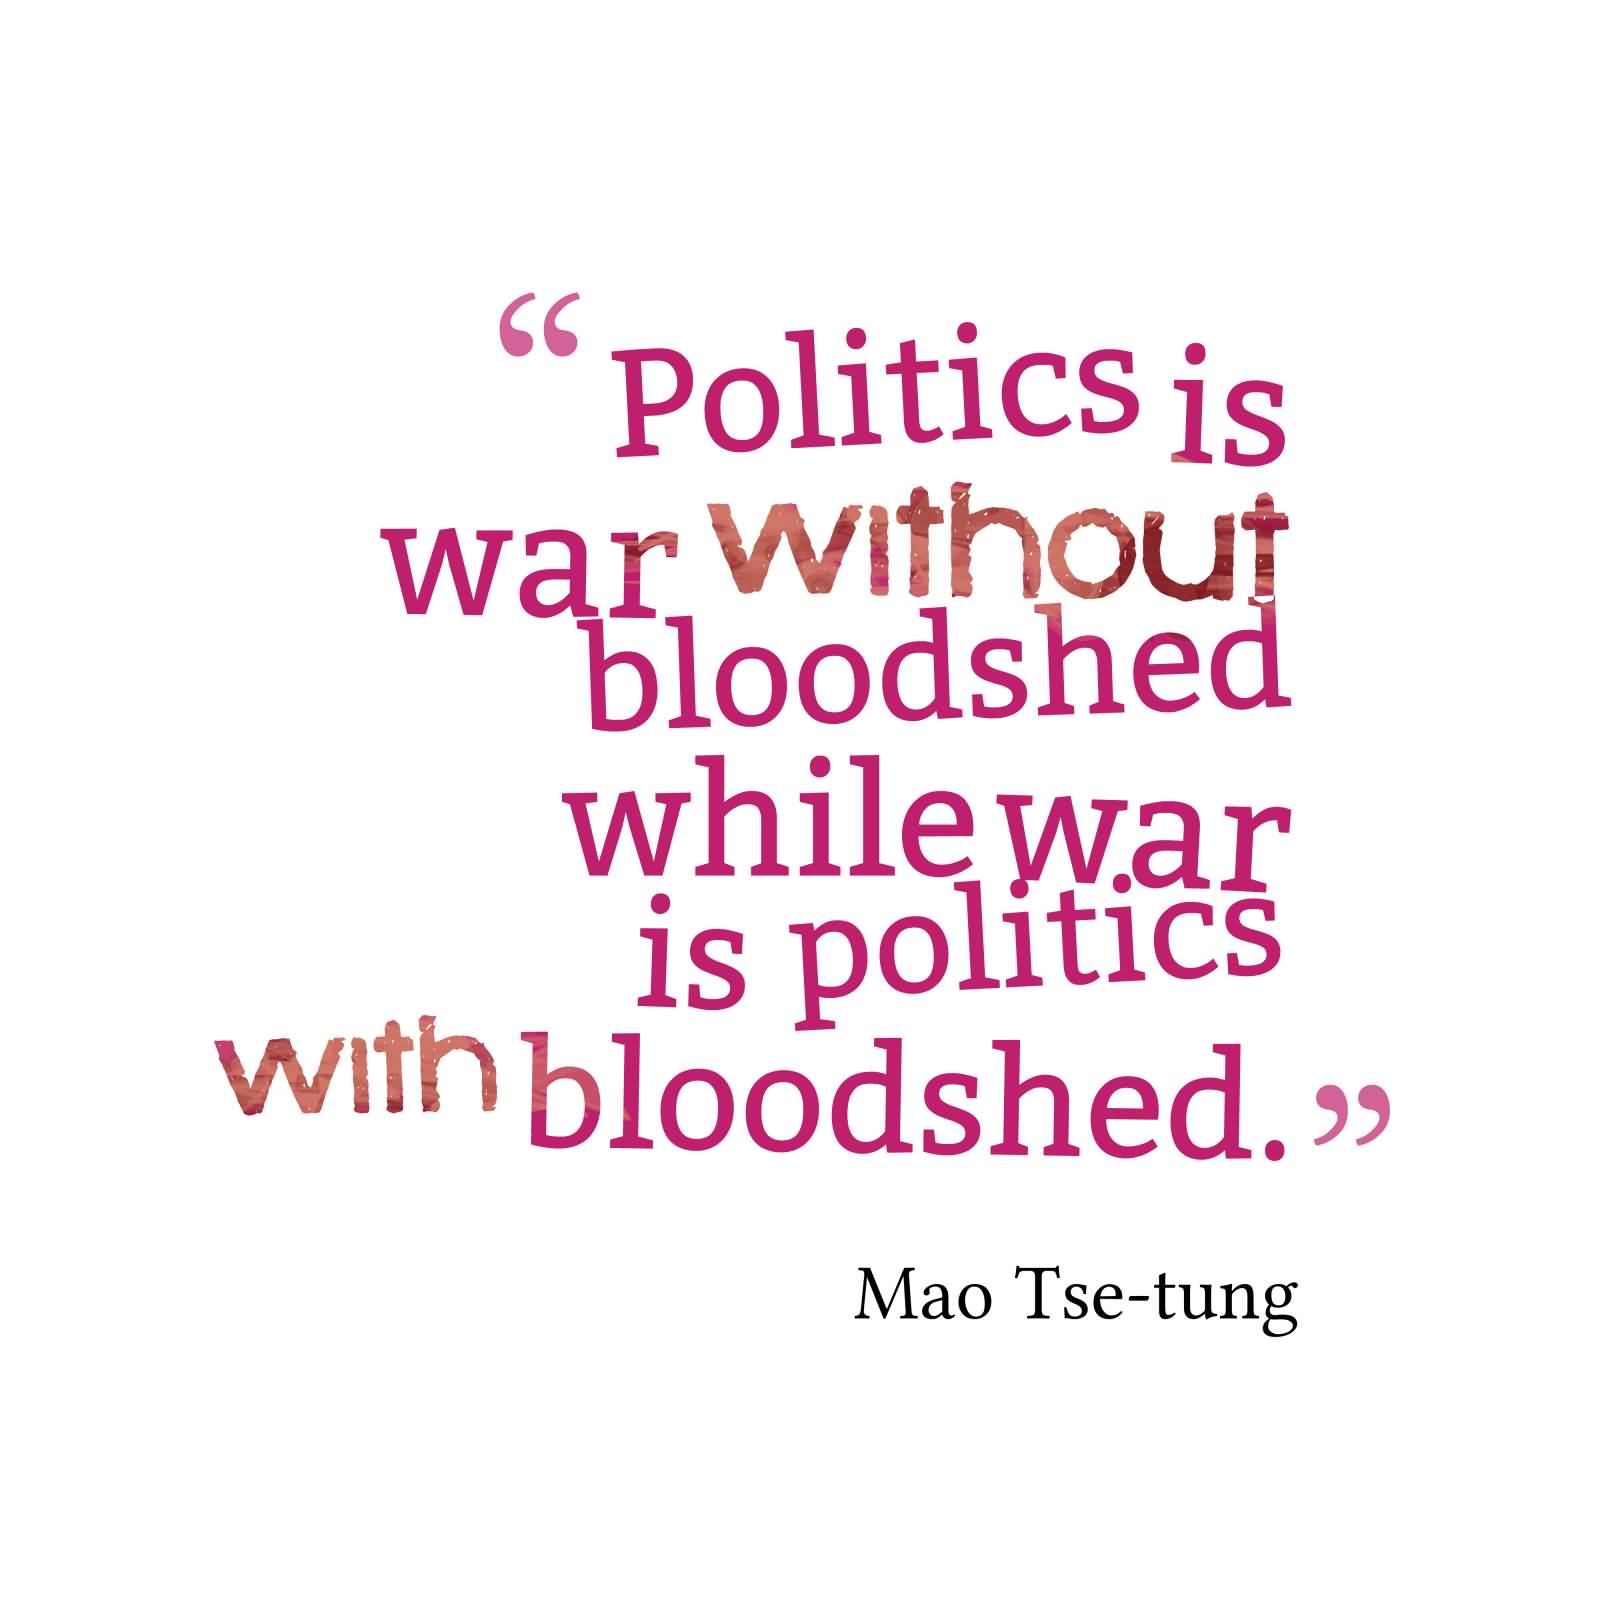 Politics is war without bloodshed while war is politics with bloodshed. Mao Tse-Tung